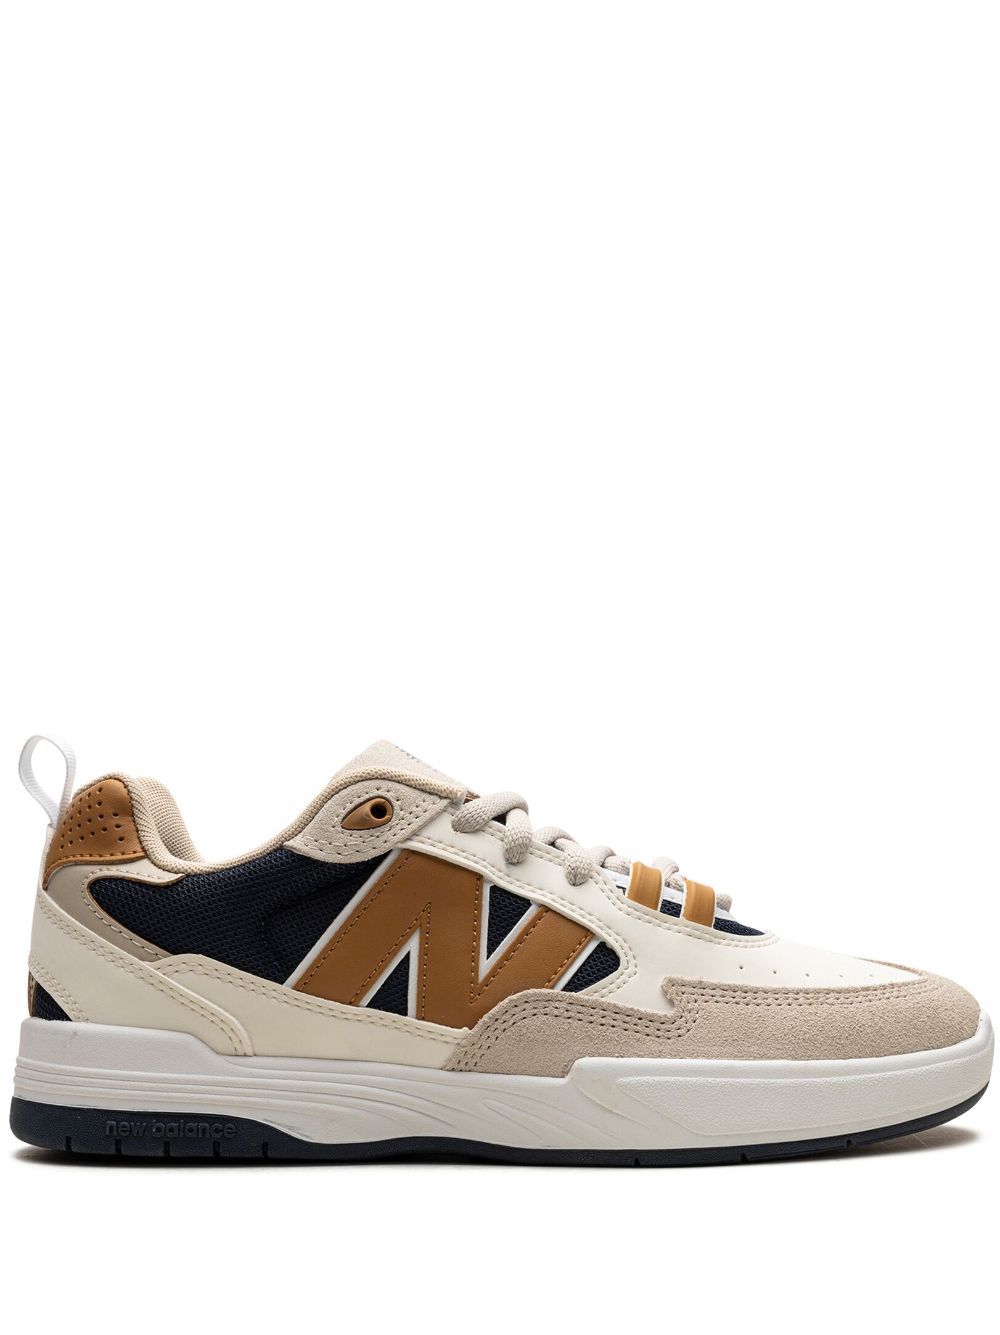 New Balance Numeric 808 "White / Tan / Navy" sneakers - Neutrals